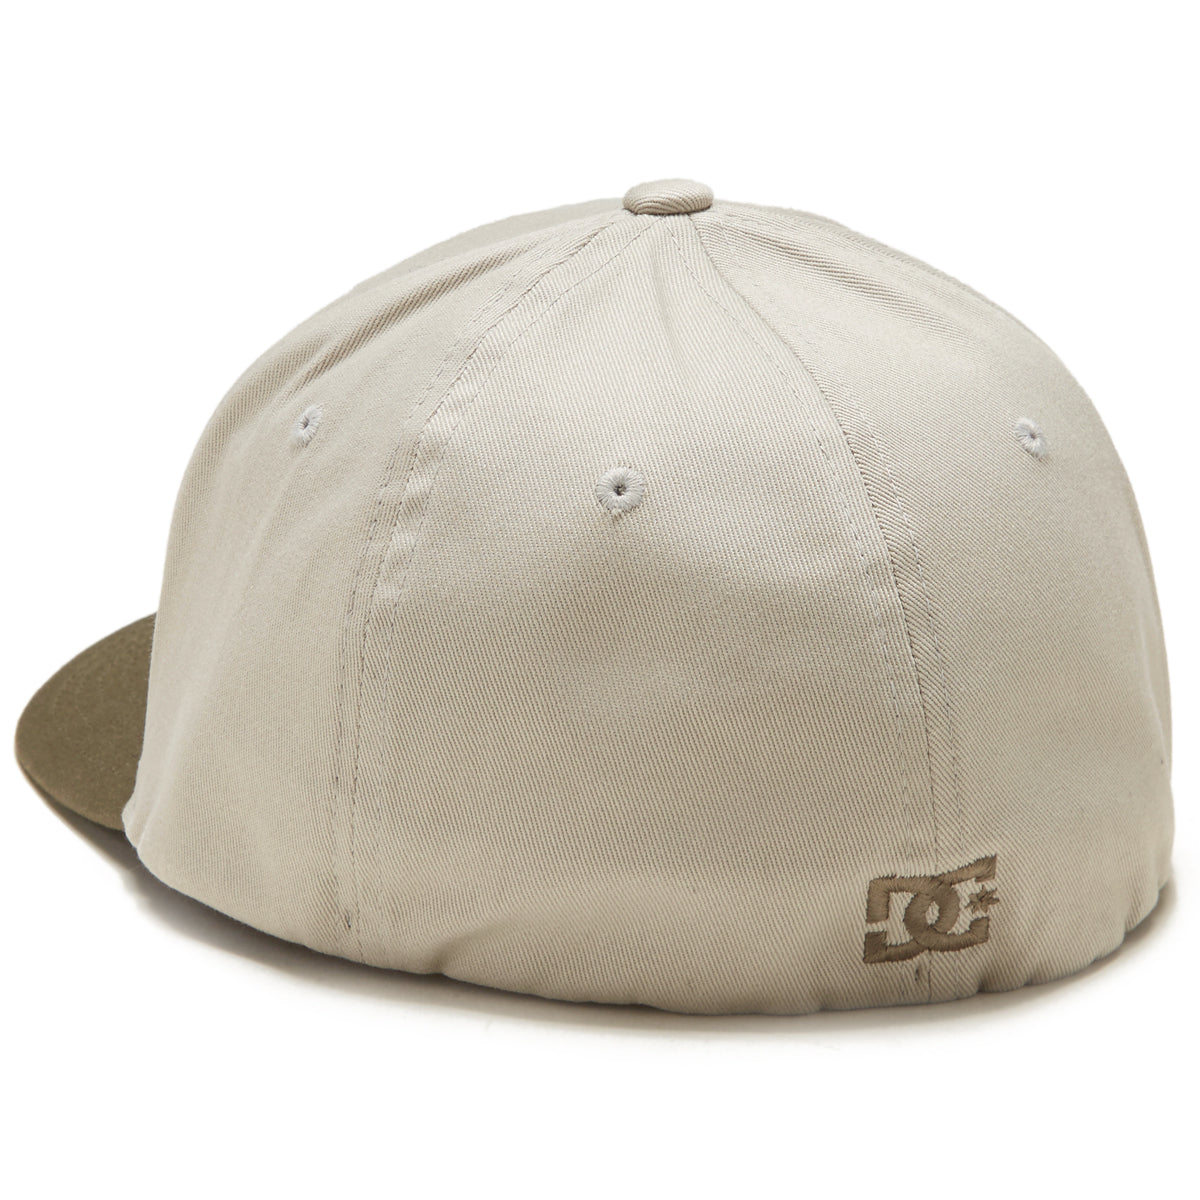 DC Cap Star Seasonal Hat - Plaza Taupe/Capers image 2